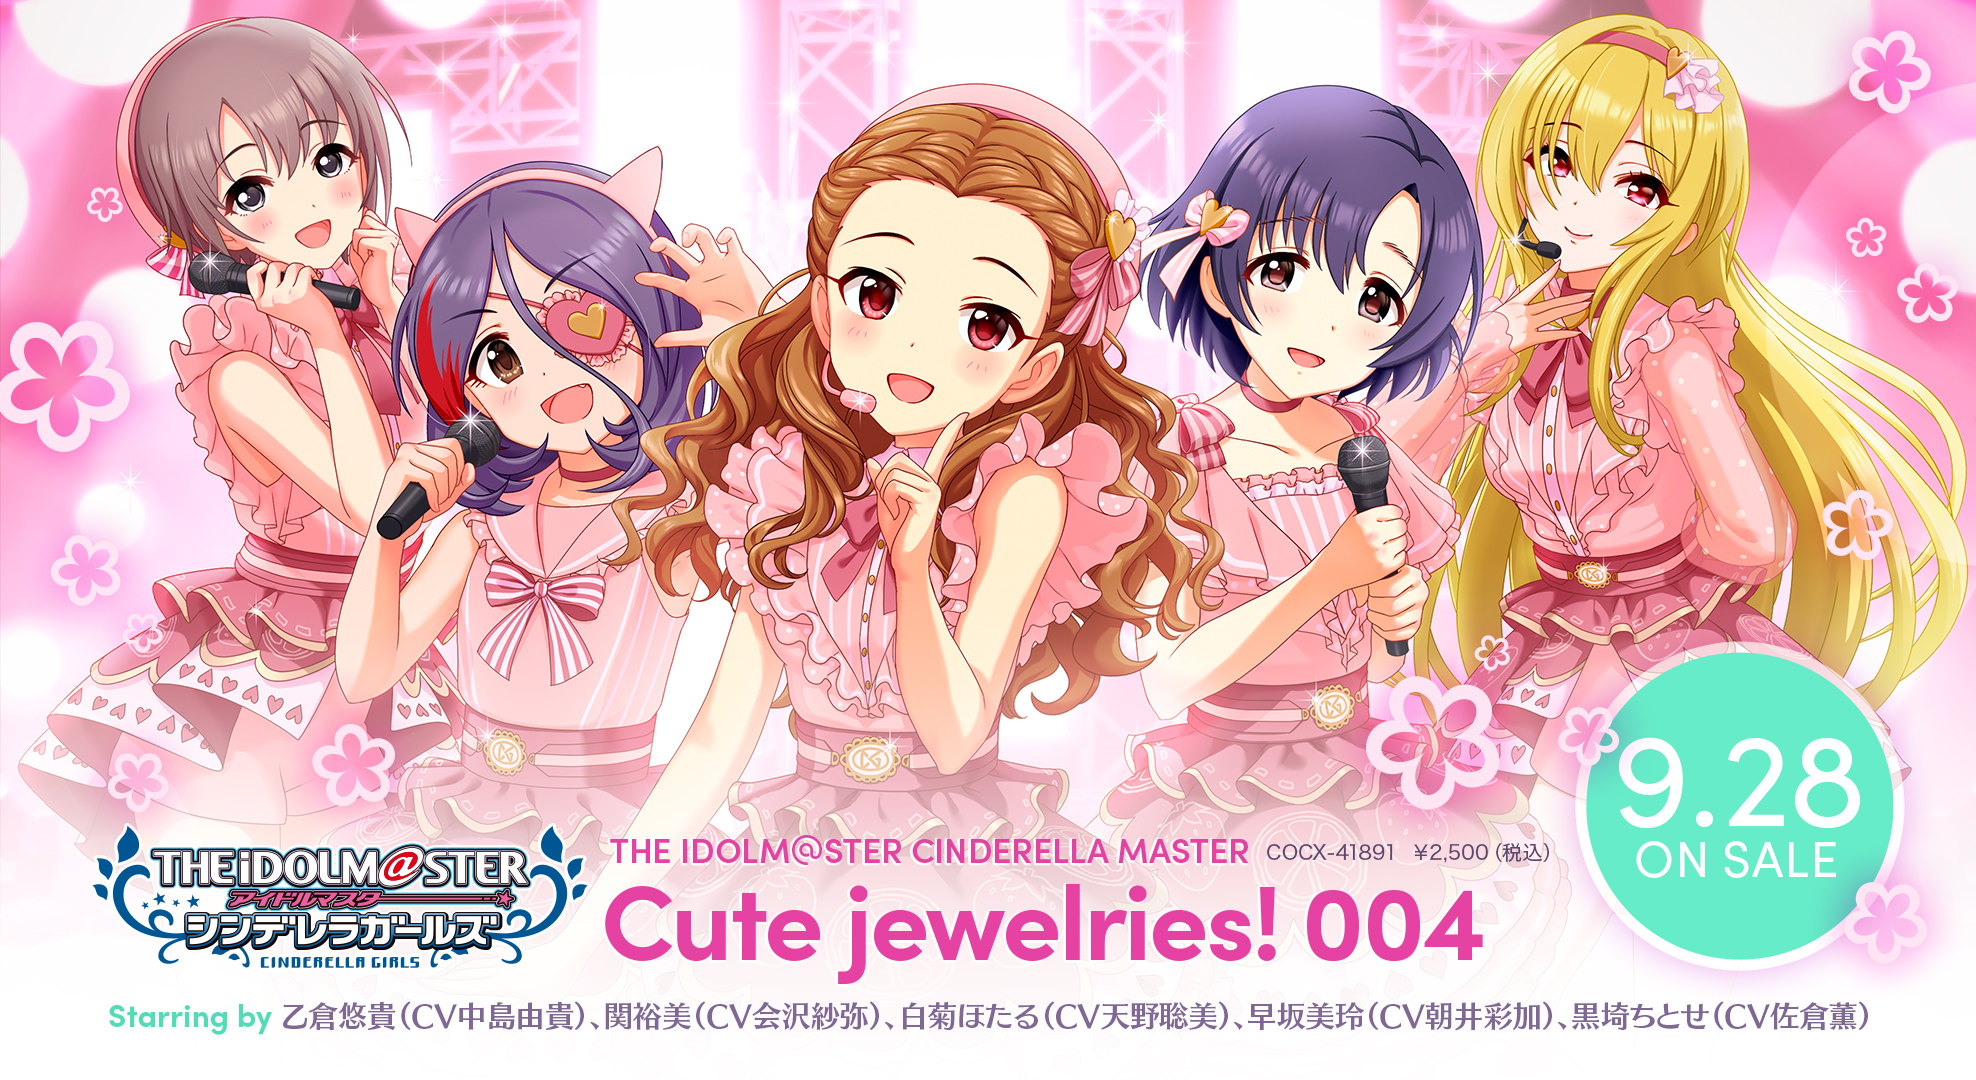 THE IDOLM@STER CINDERELLA MASTER　Cute jewelries! 004